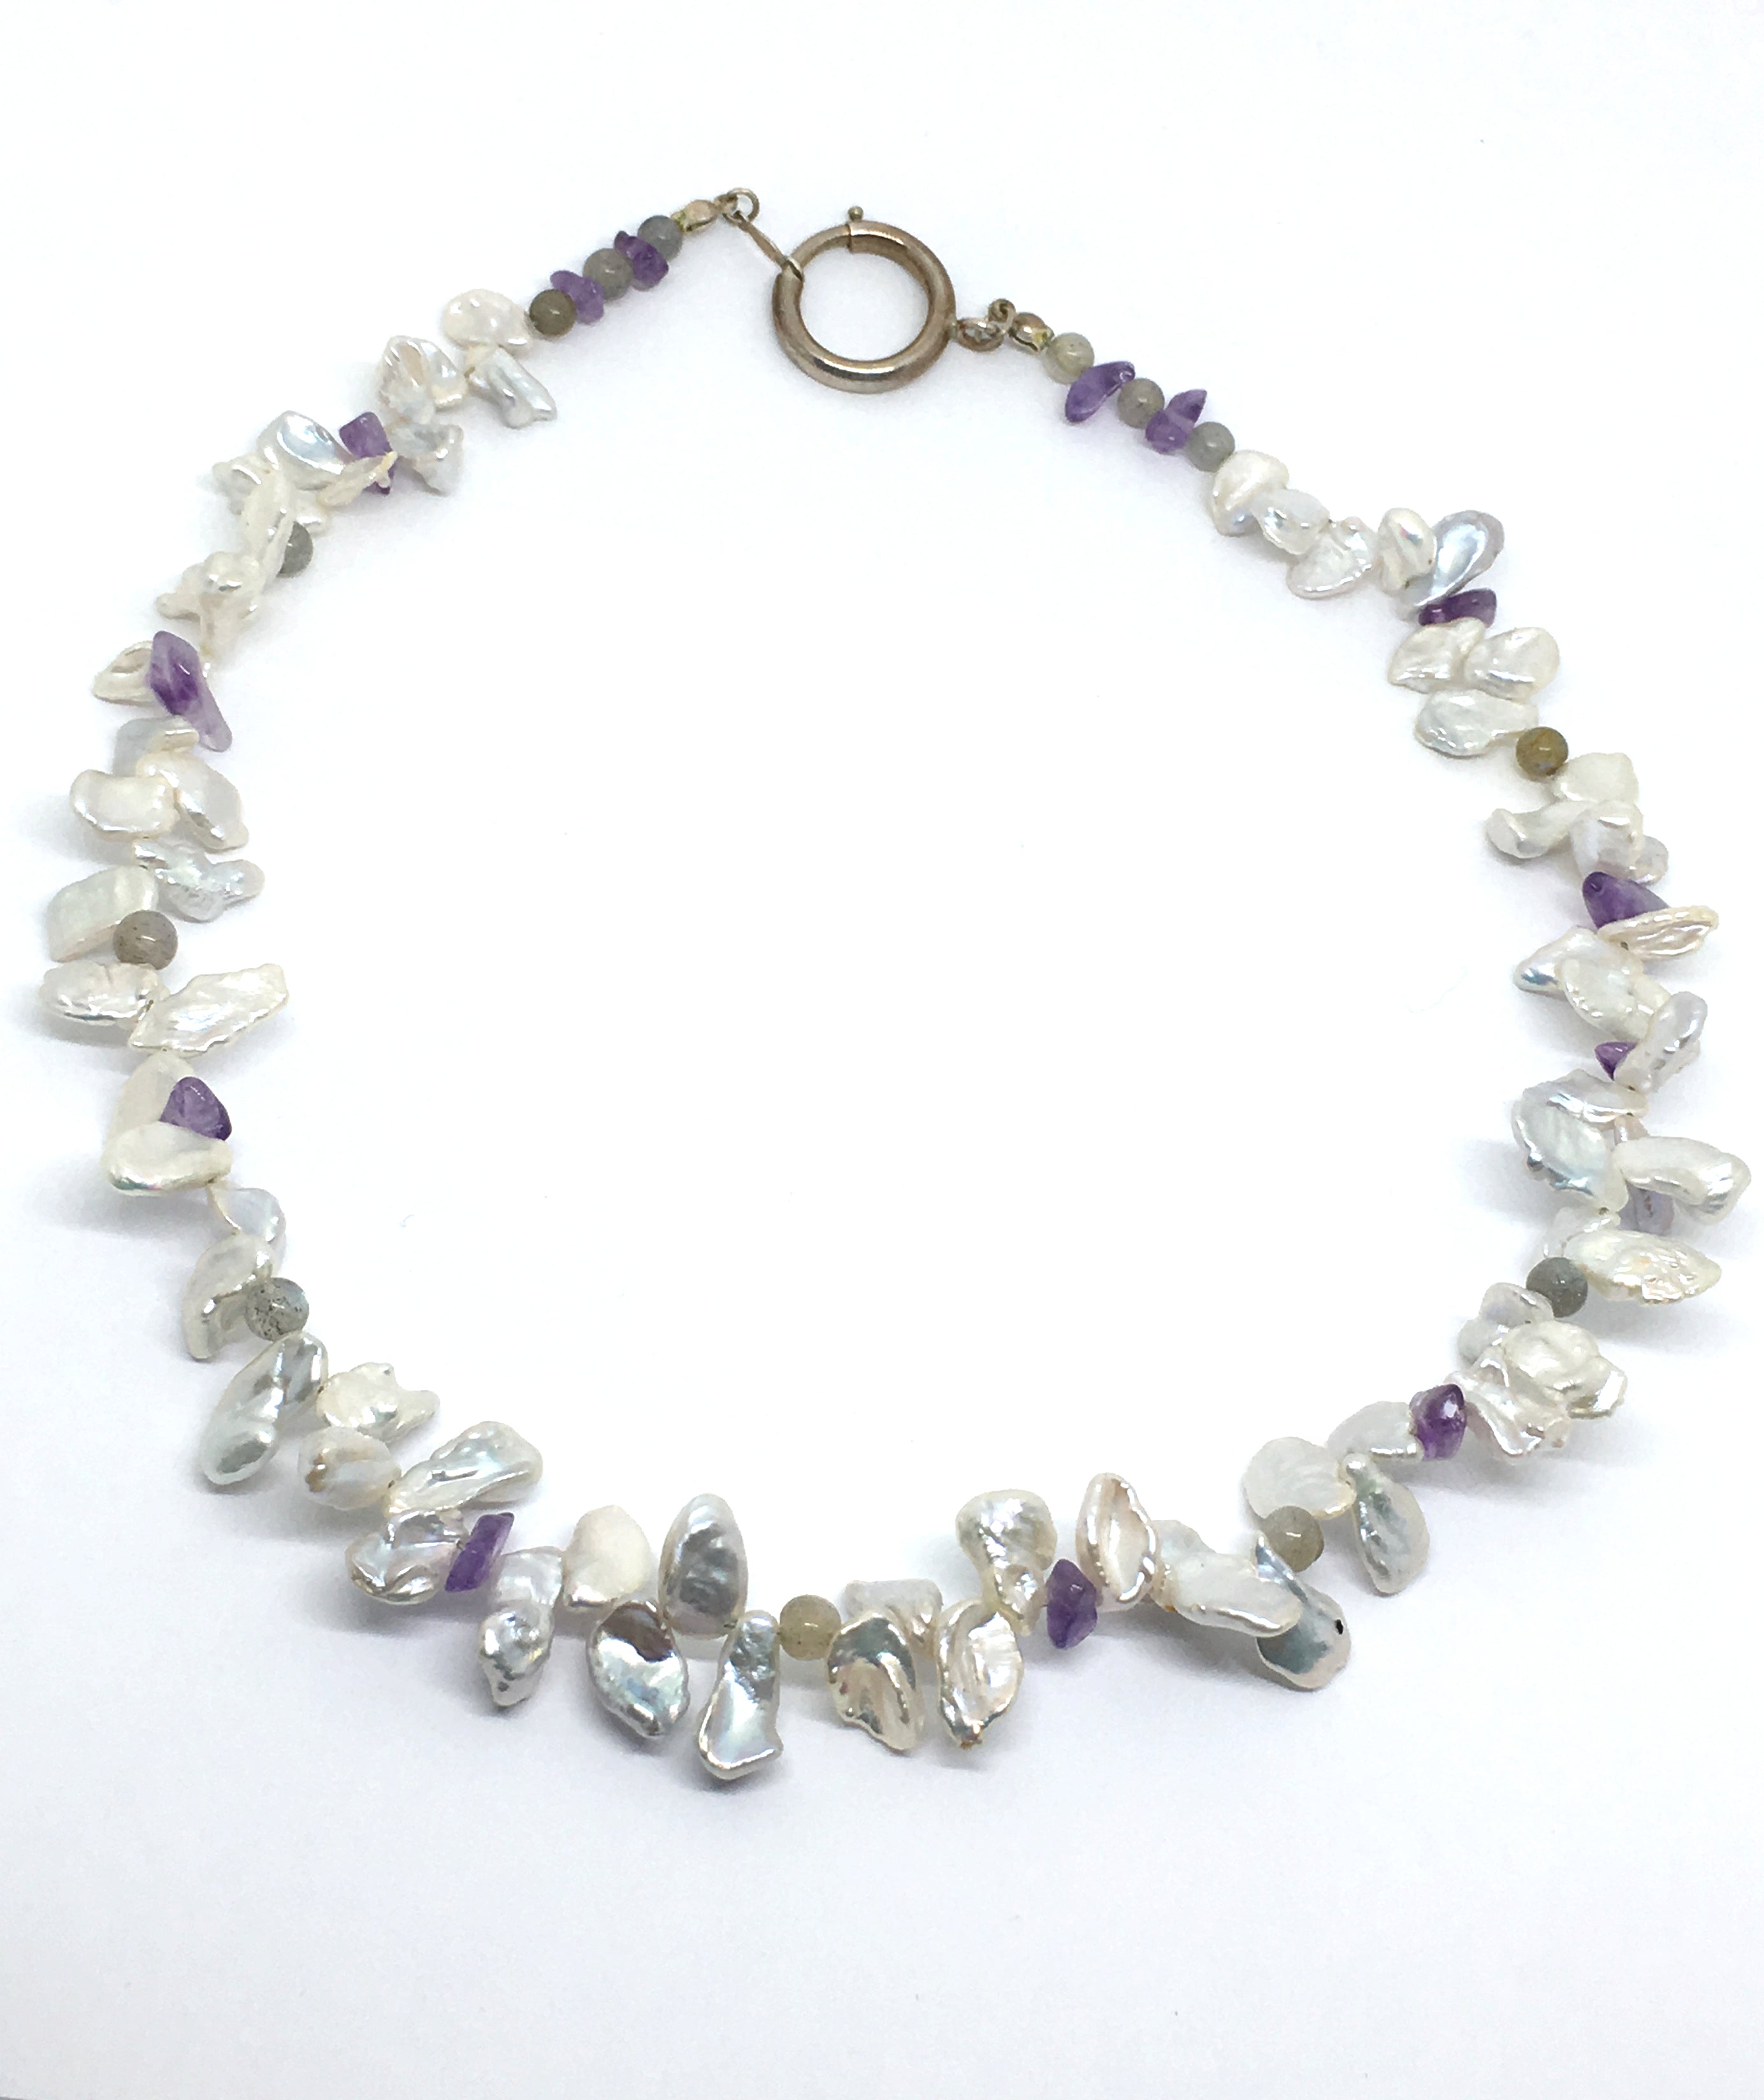 freshwater pearl petal necklace with labradorite and amethyst gemstones